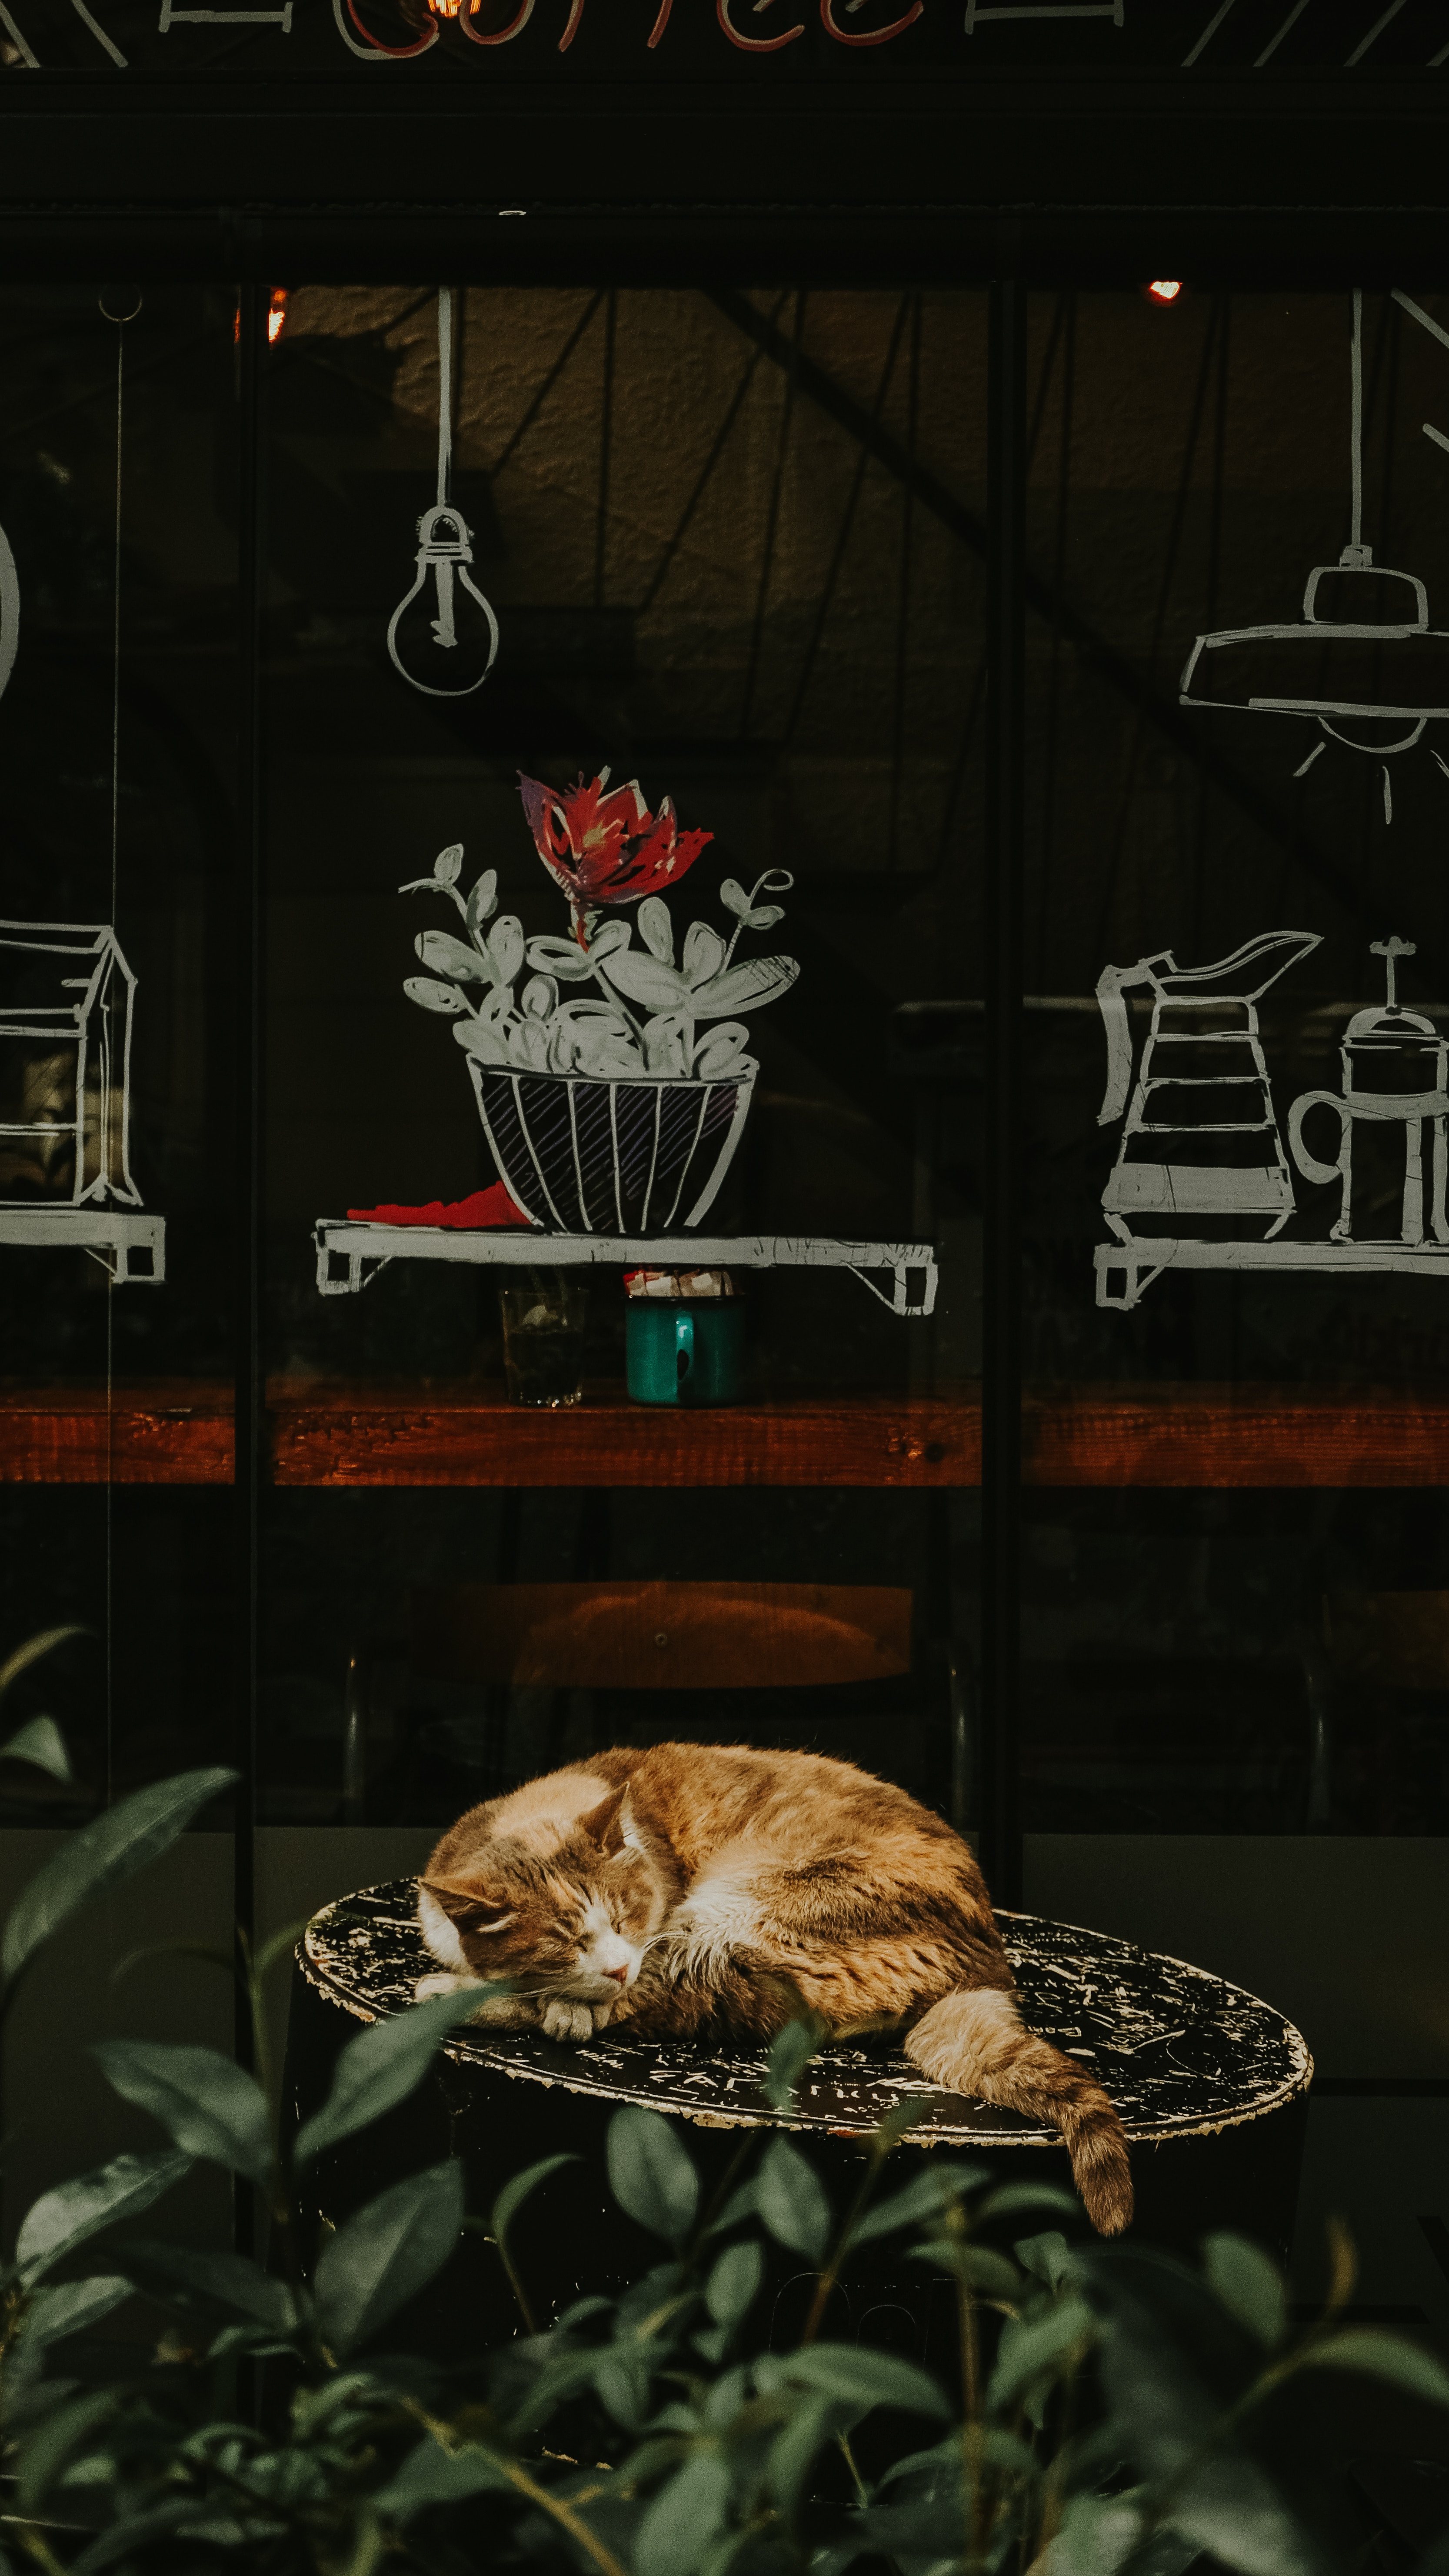 94854 download wallpaper animals, red, flower, cat, chair, redhead, showcase, asleep, sleeps screensavers and pictures for free